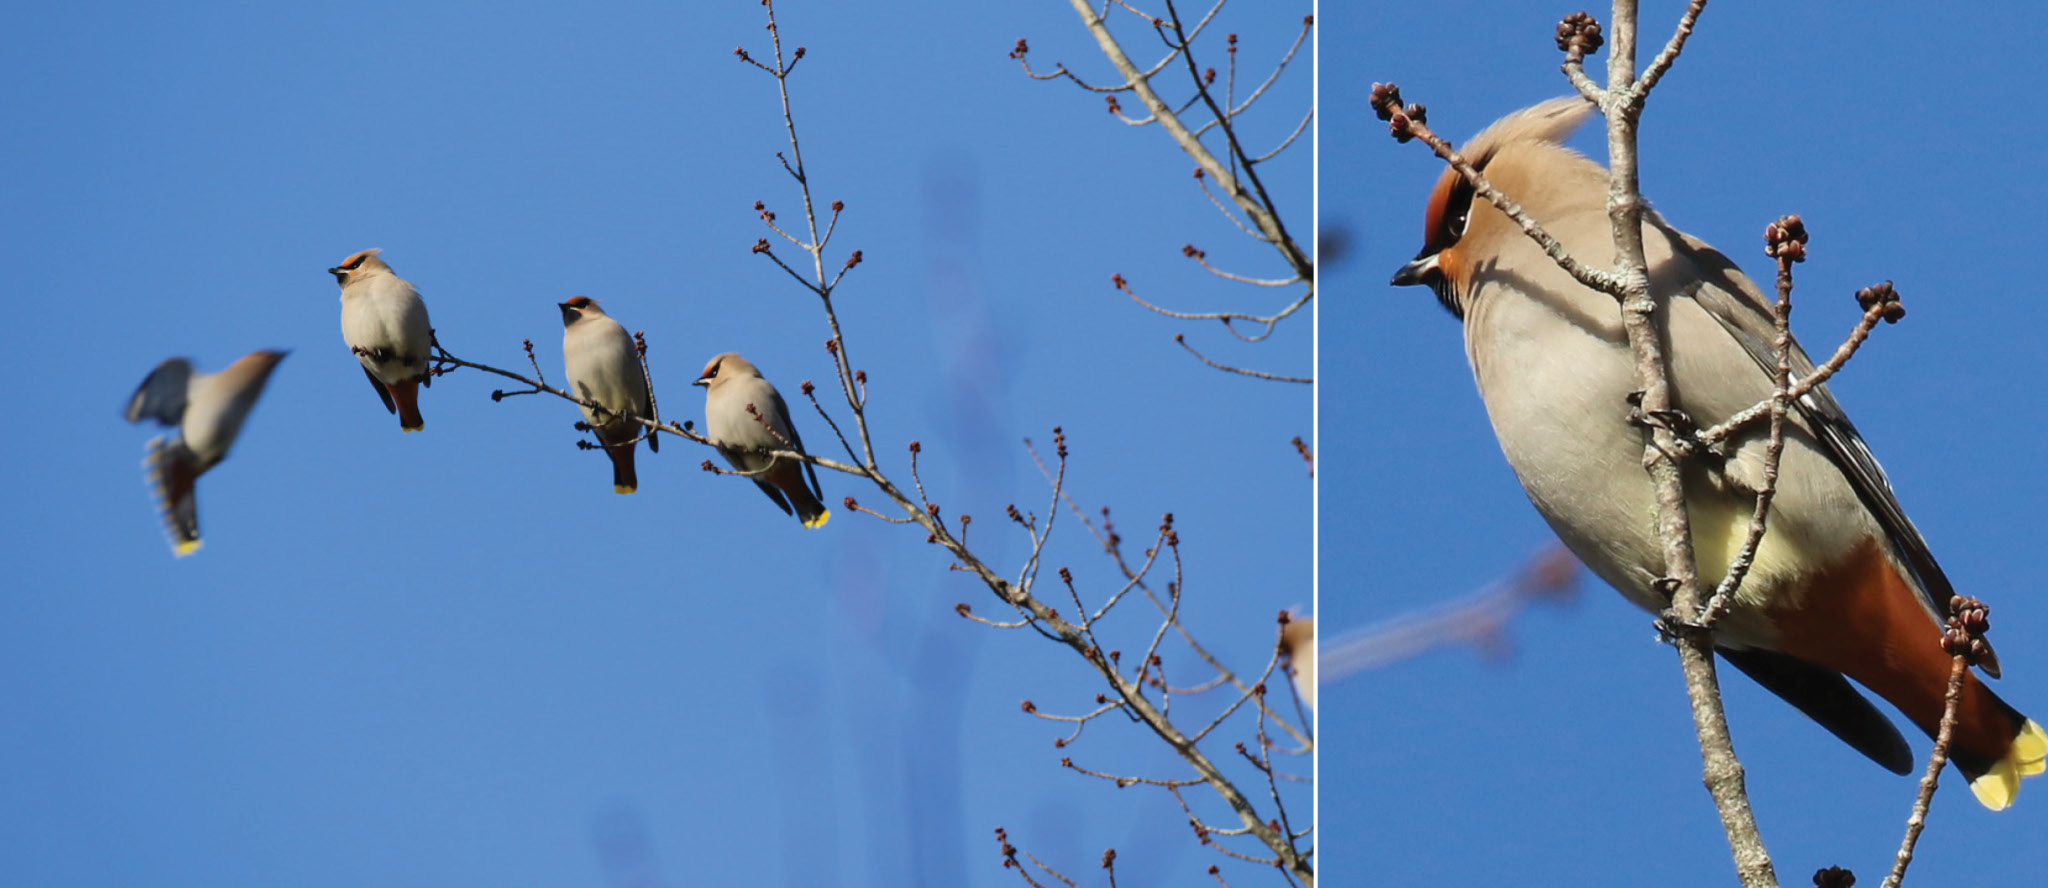 At left: a Bohemian waxwing joining the flock of three others, set against a bright blue sky. At right: a close-up view of a solo Bohemian waxwing, perched on a branch, with a blue sky in the background.